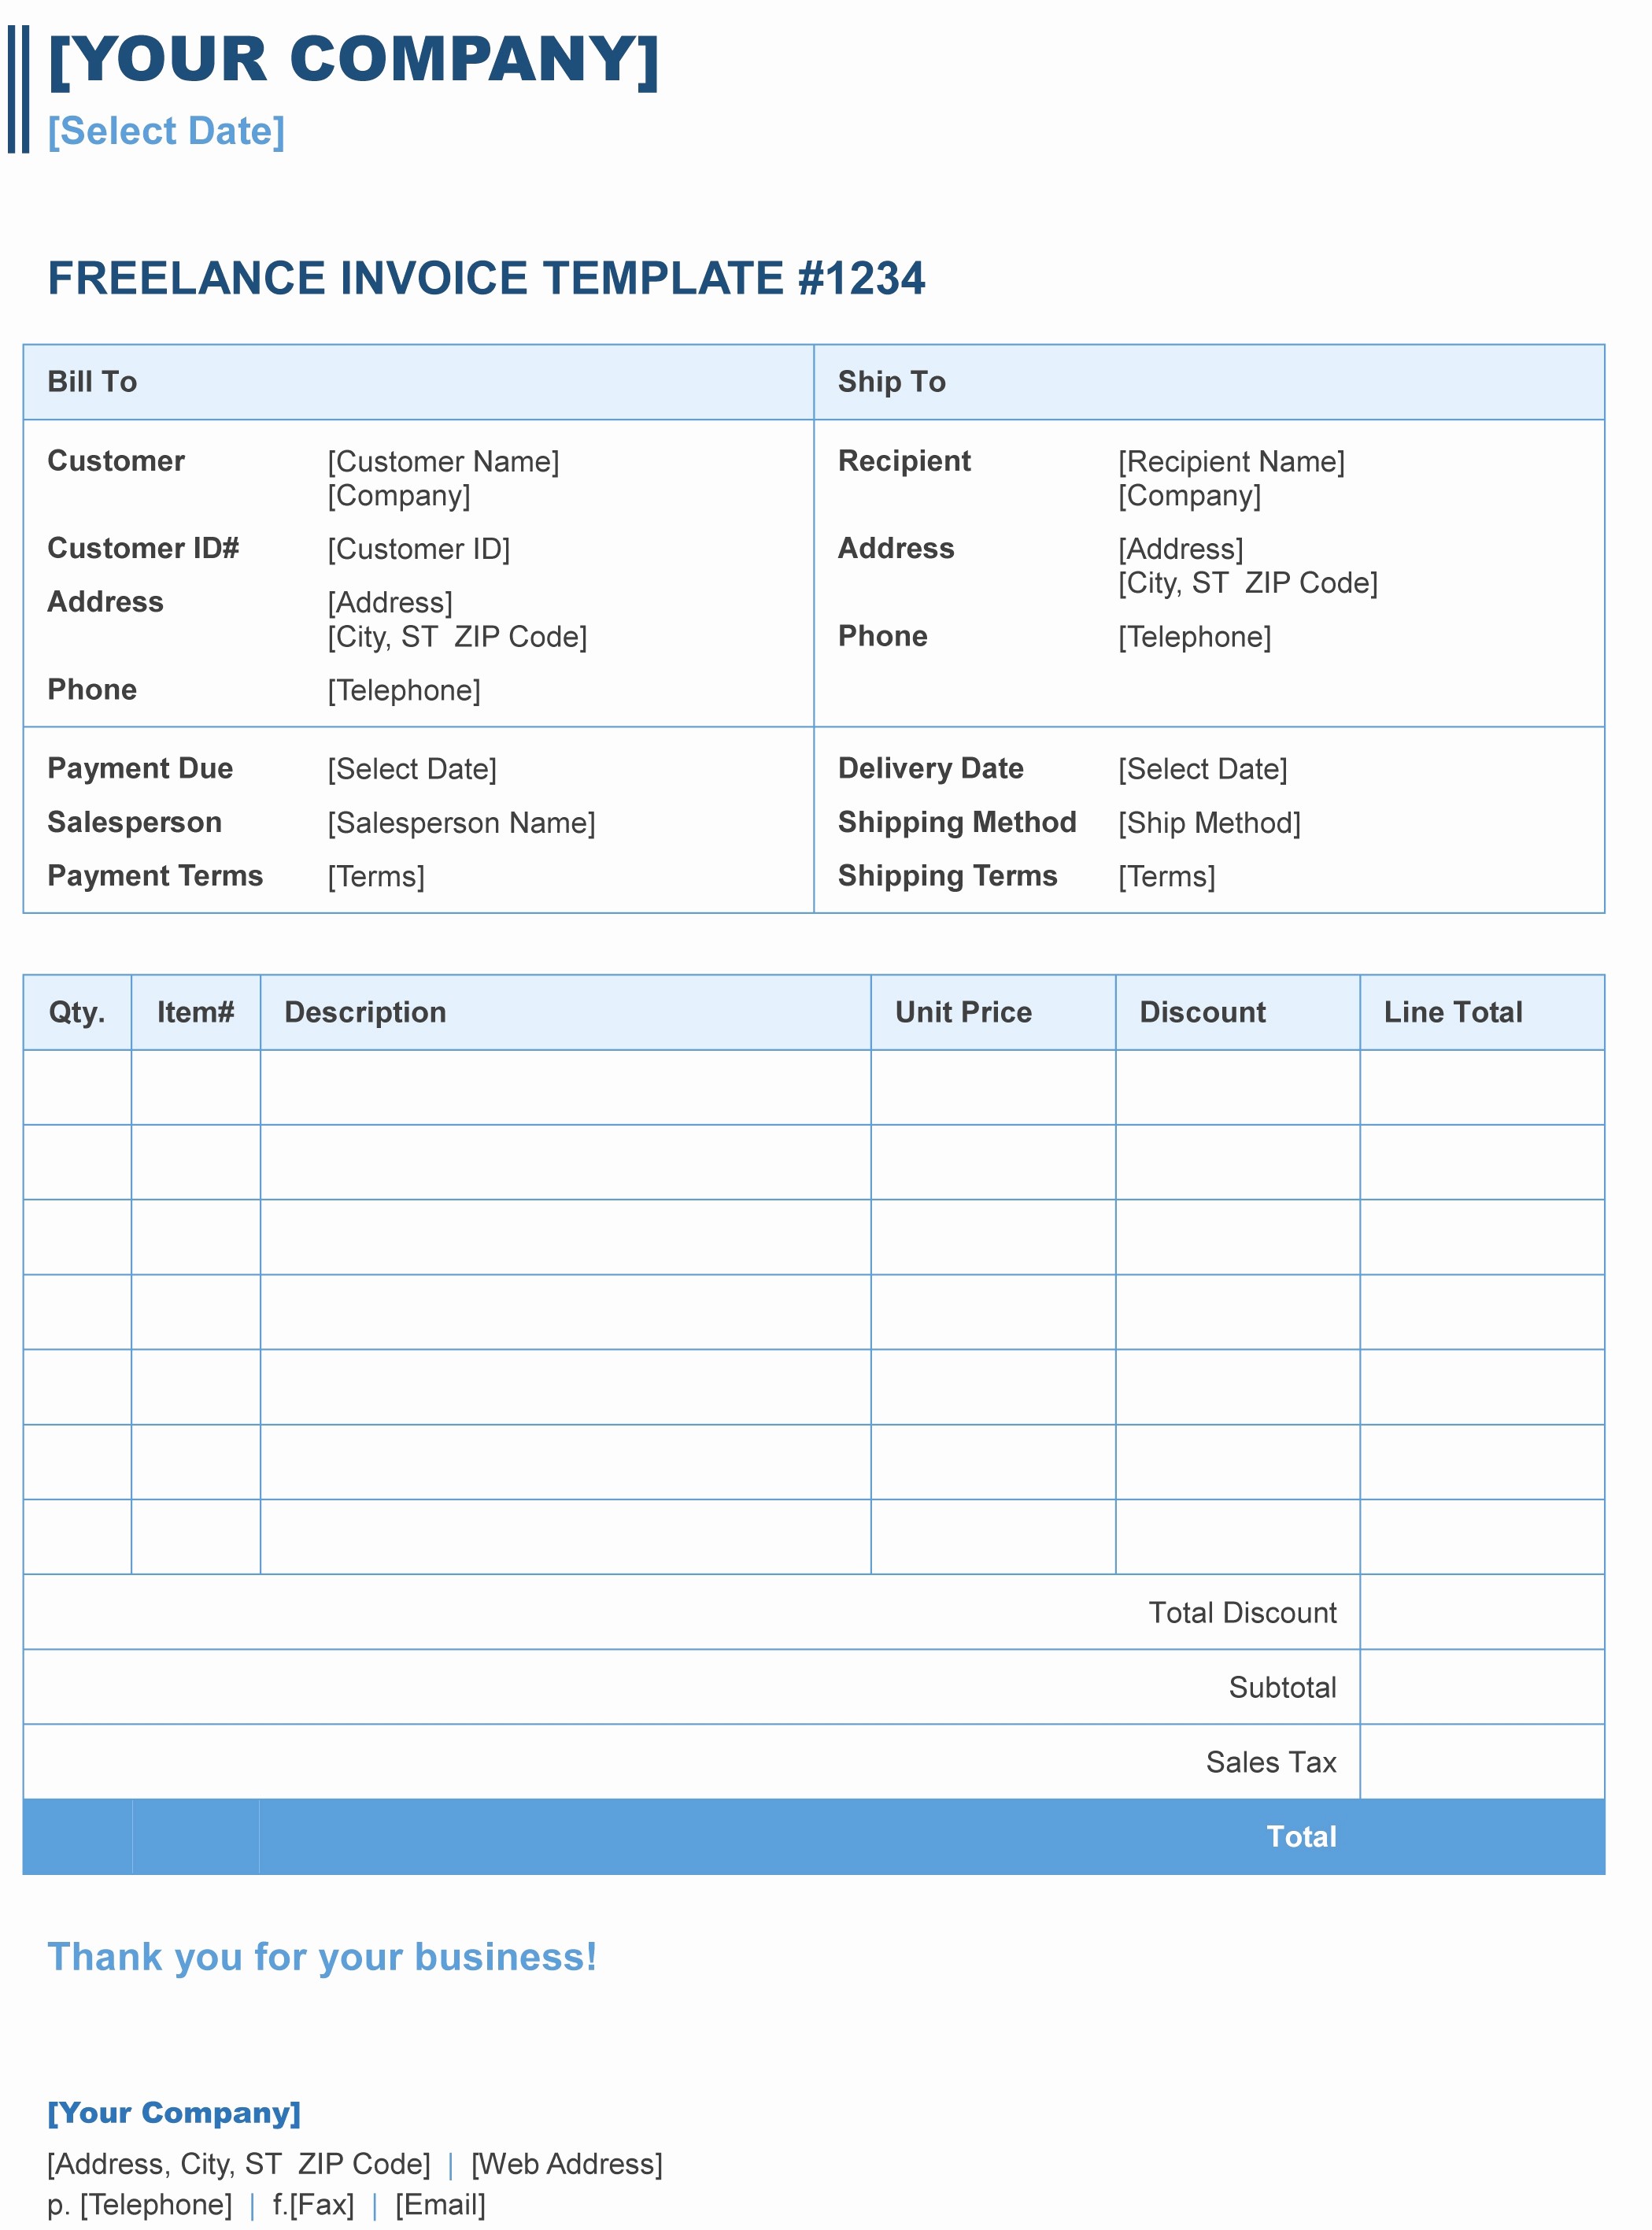 Free Templates for Billing Invoices Awesome Freelance Invoice Template Excel